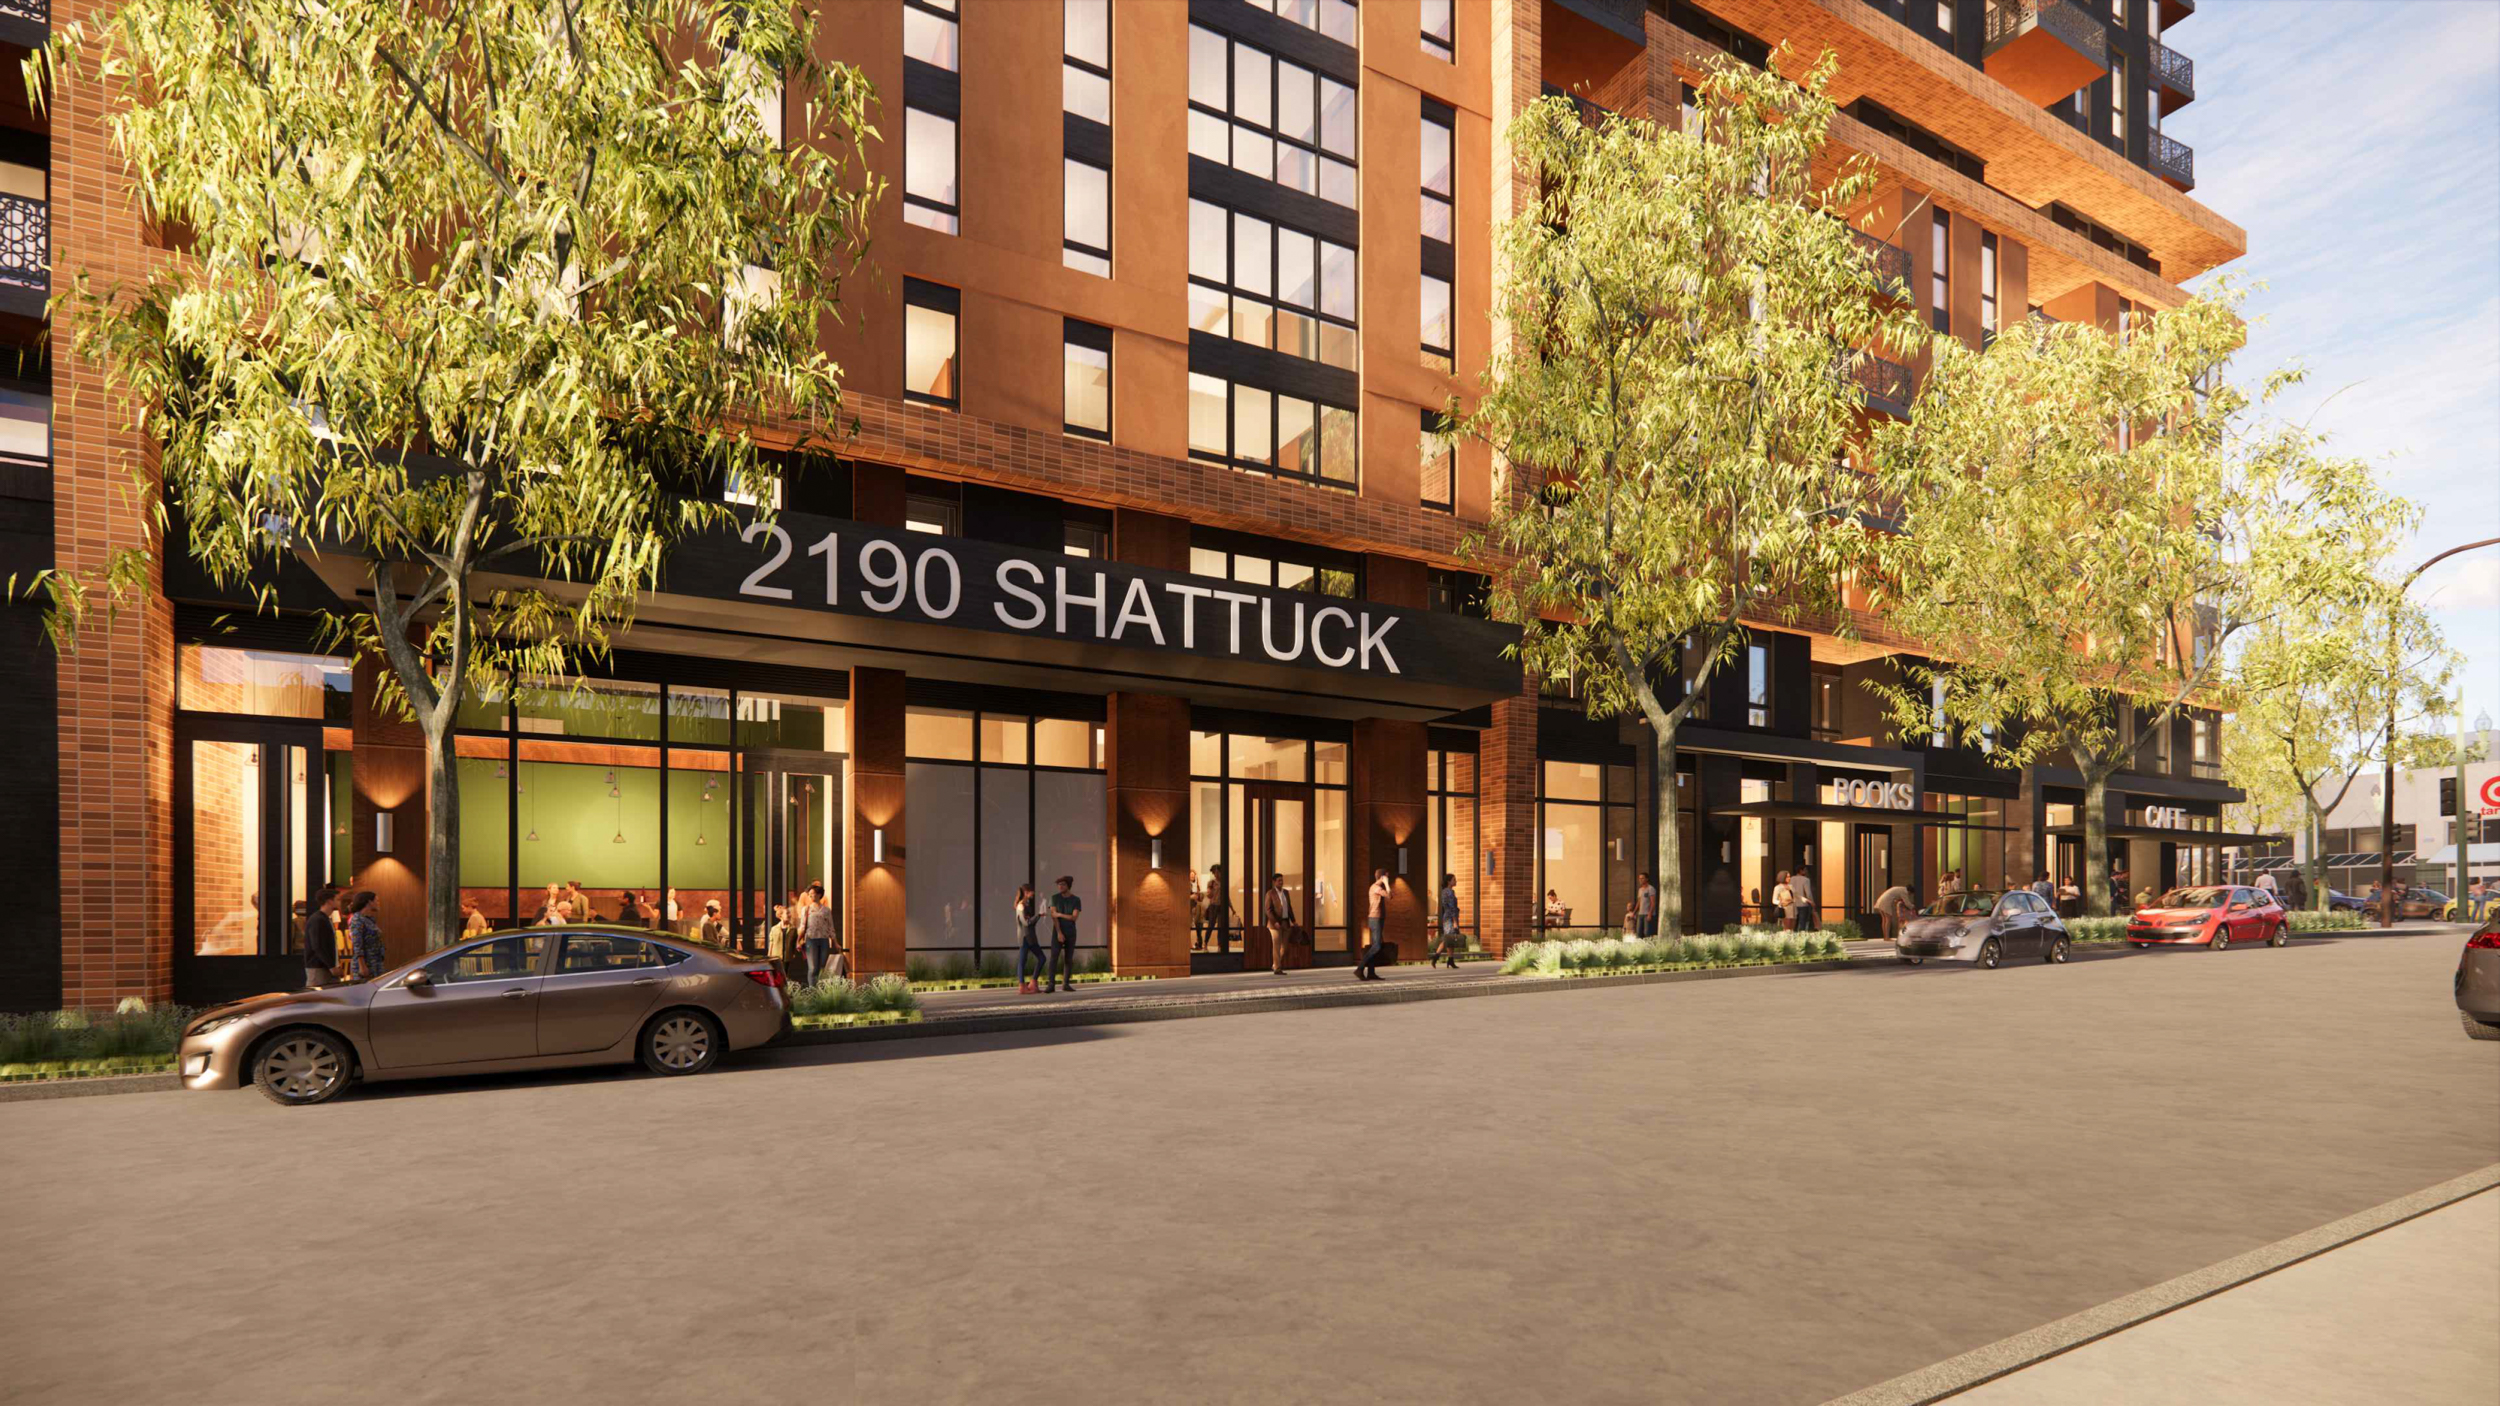 2190 Shattuck Avenue residential lobby entrance, rendering by Trachtenberg Architects